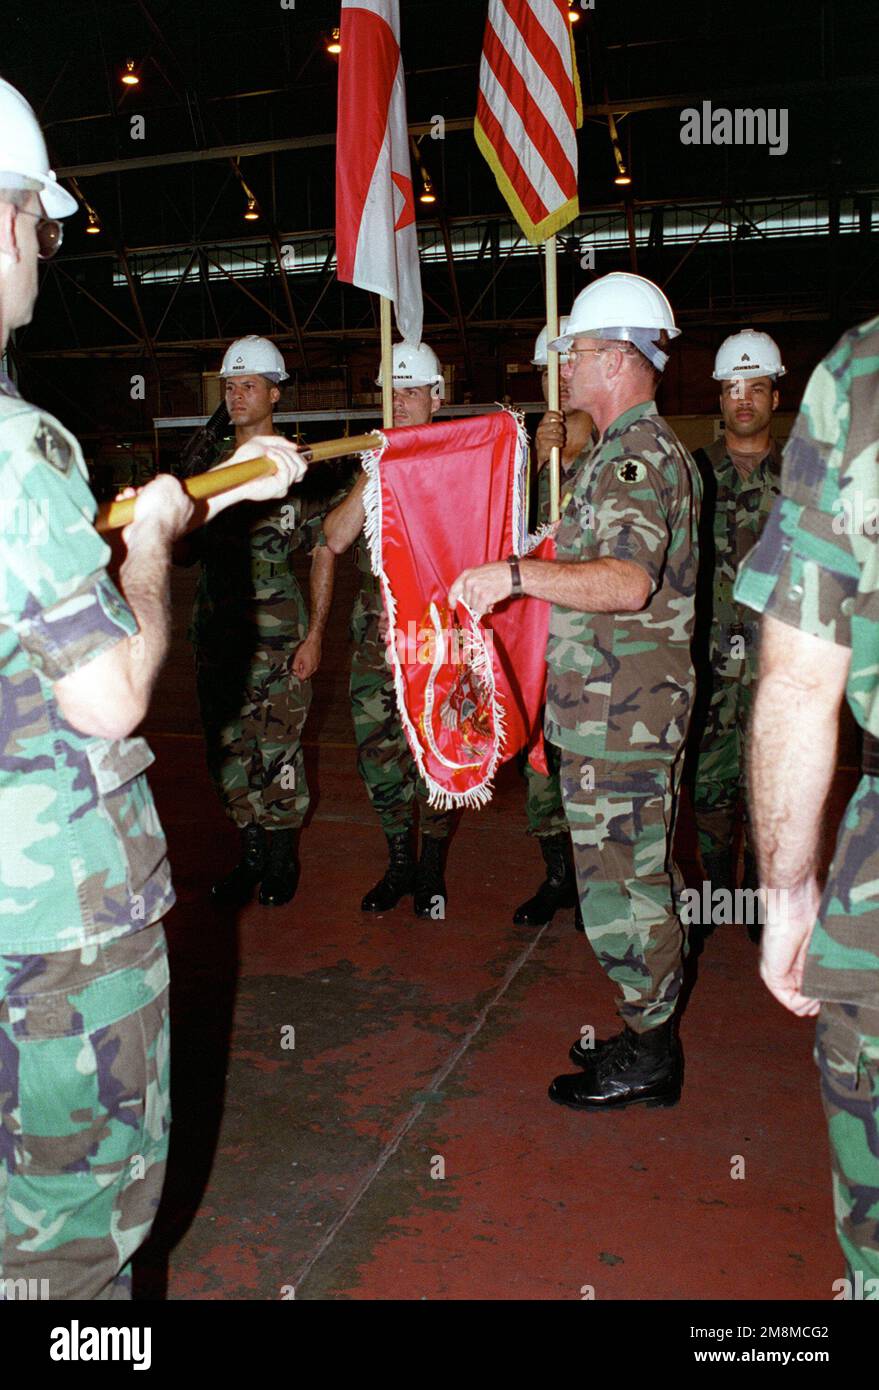 Lieutenant Colonel James E. Koch Commander of the 536th Engineer Combat Battalion (Heavy) retire the colors of his unit during the inactivation ceremonies for the 536th Eng. Comb. BN (H) held in hangar #4. Base: Howard Air Force Base Country: Panama (PAN) Stock Photo